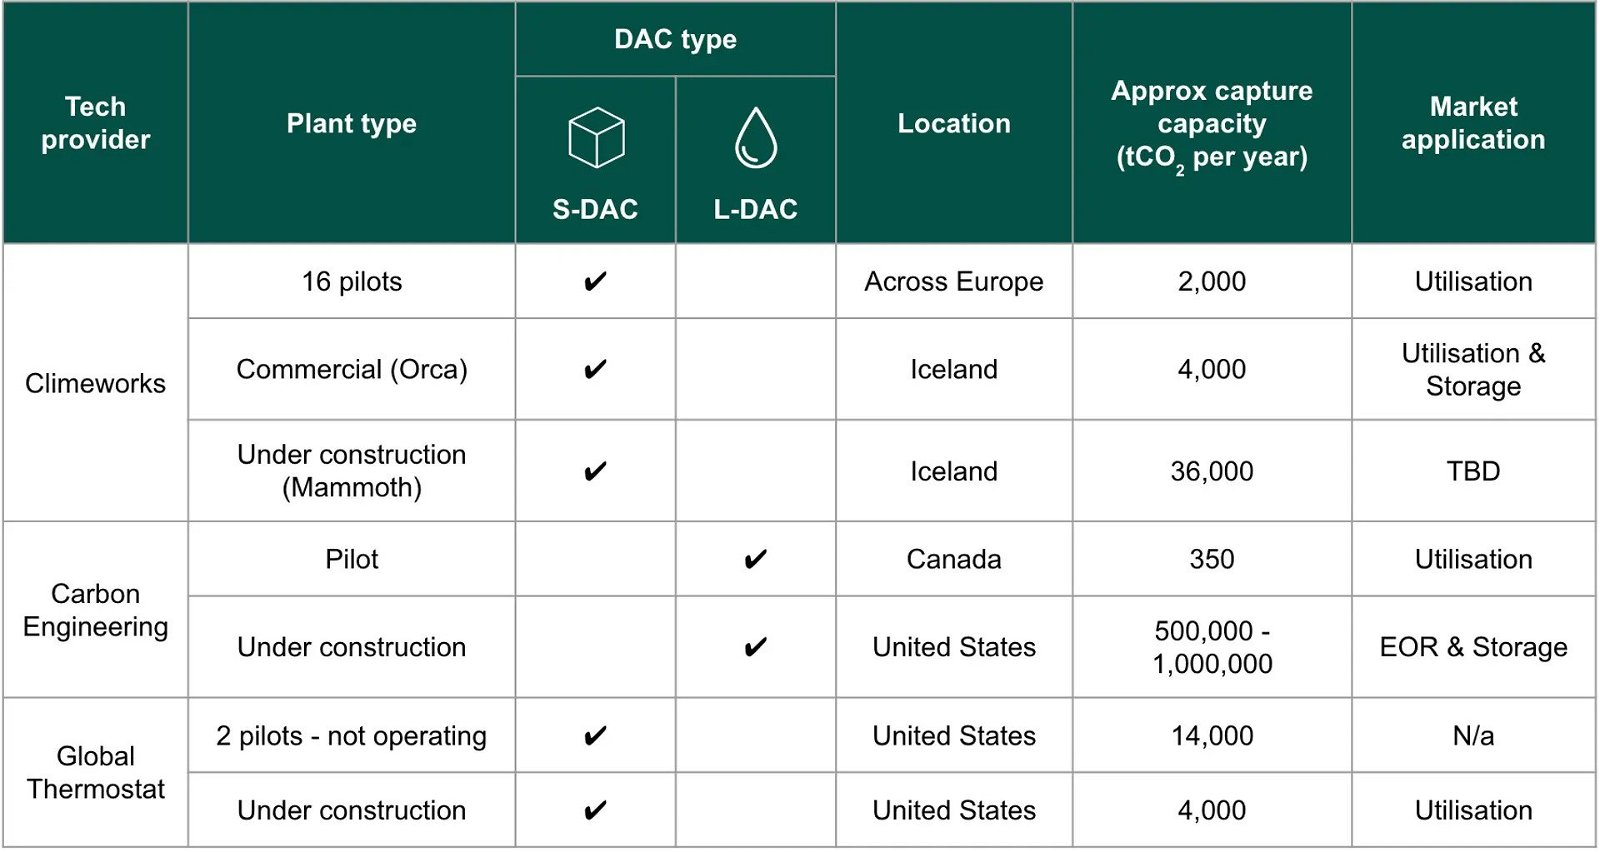 The three main DAC technology providers and their projects